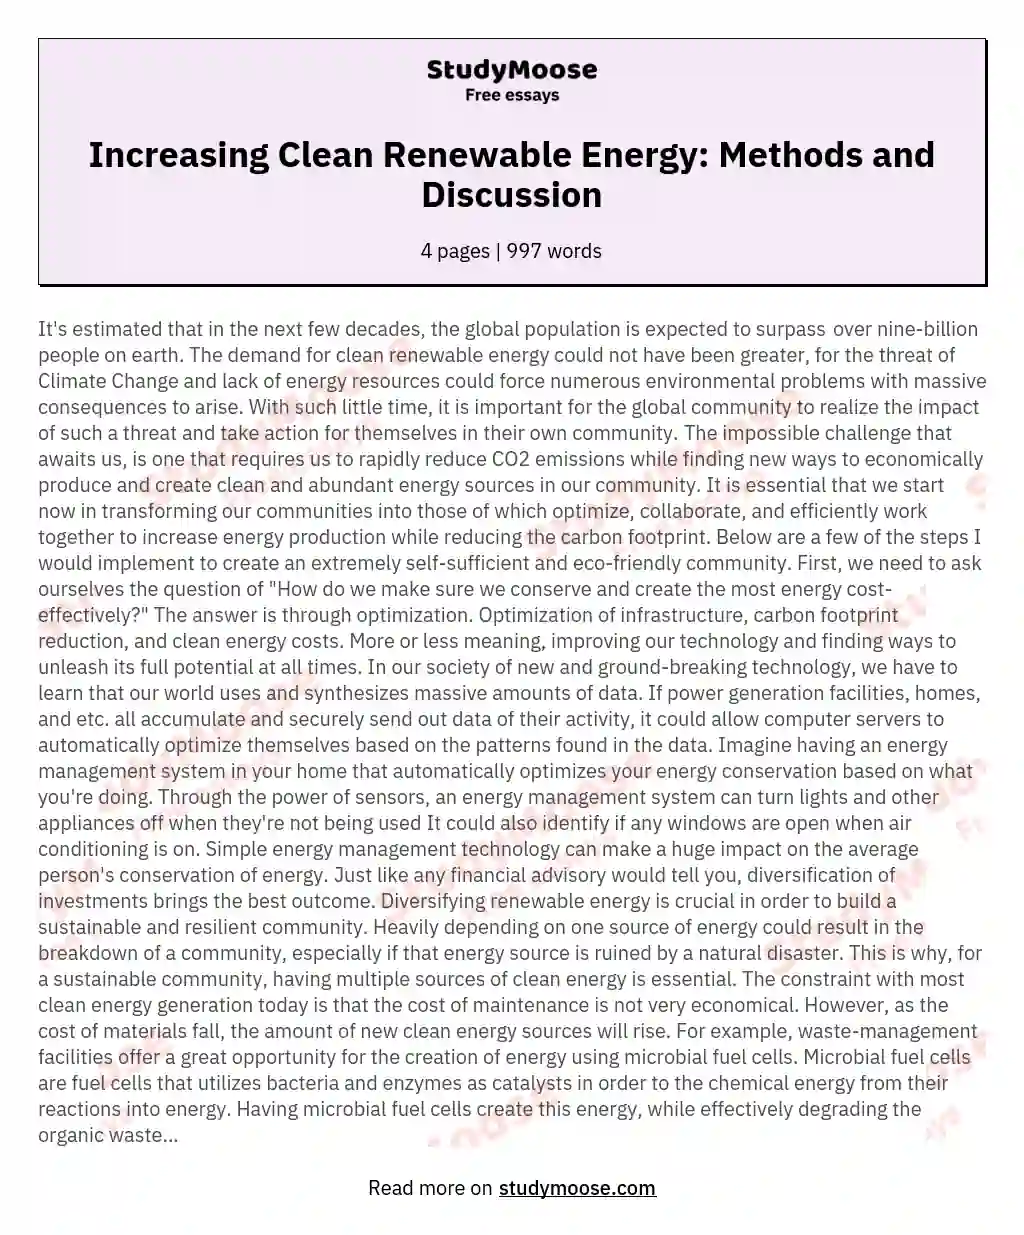 Increasing Clean Renewable Energy: Methods and Discussion essay